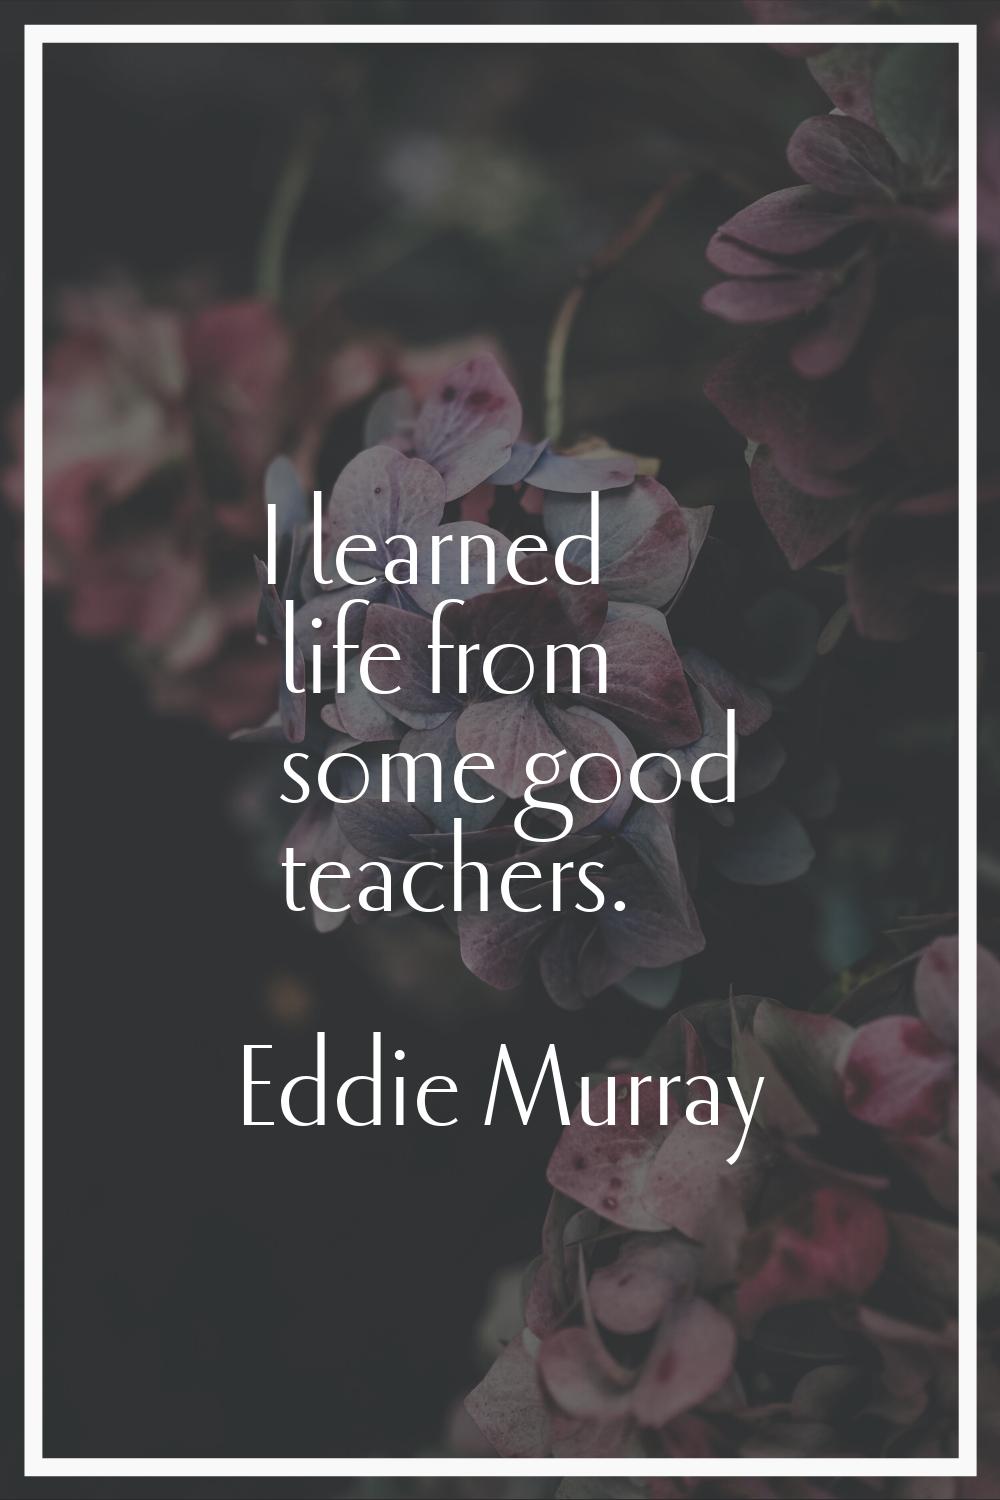 I learned life from some good teachers.